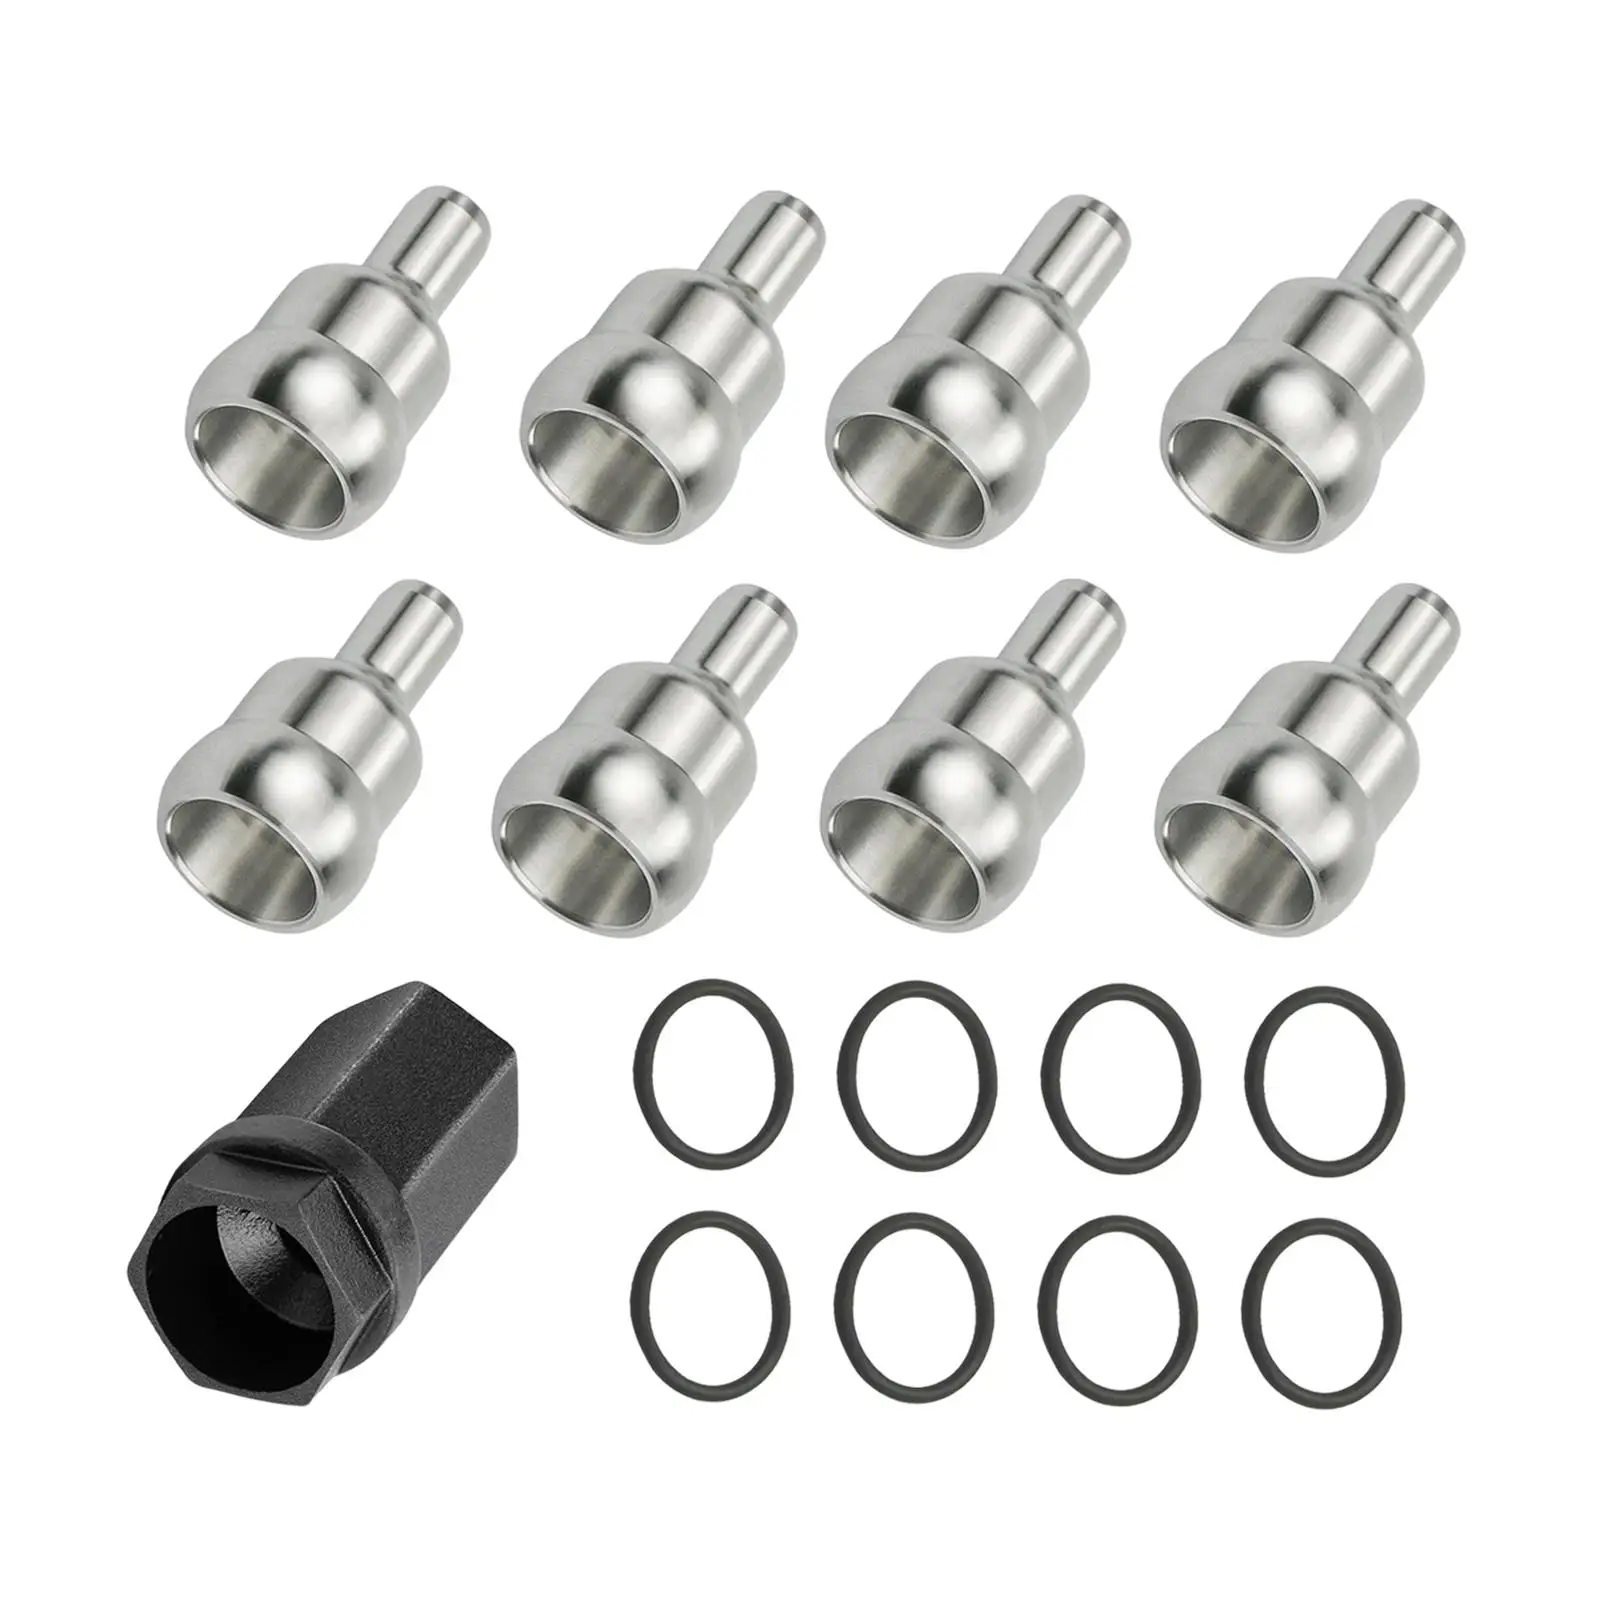 Nipple Cup Kit, 8x Nipples 8x Seals Fit for Ford 6.0L Accessories Durable